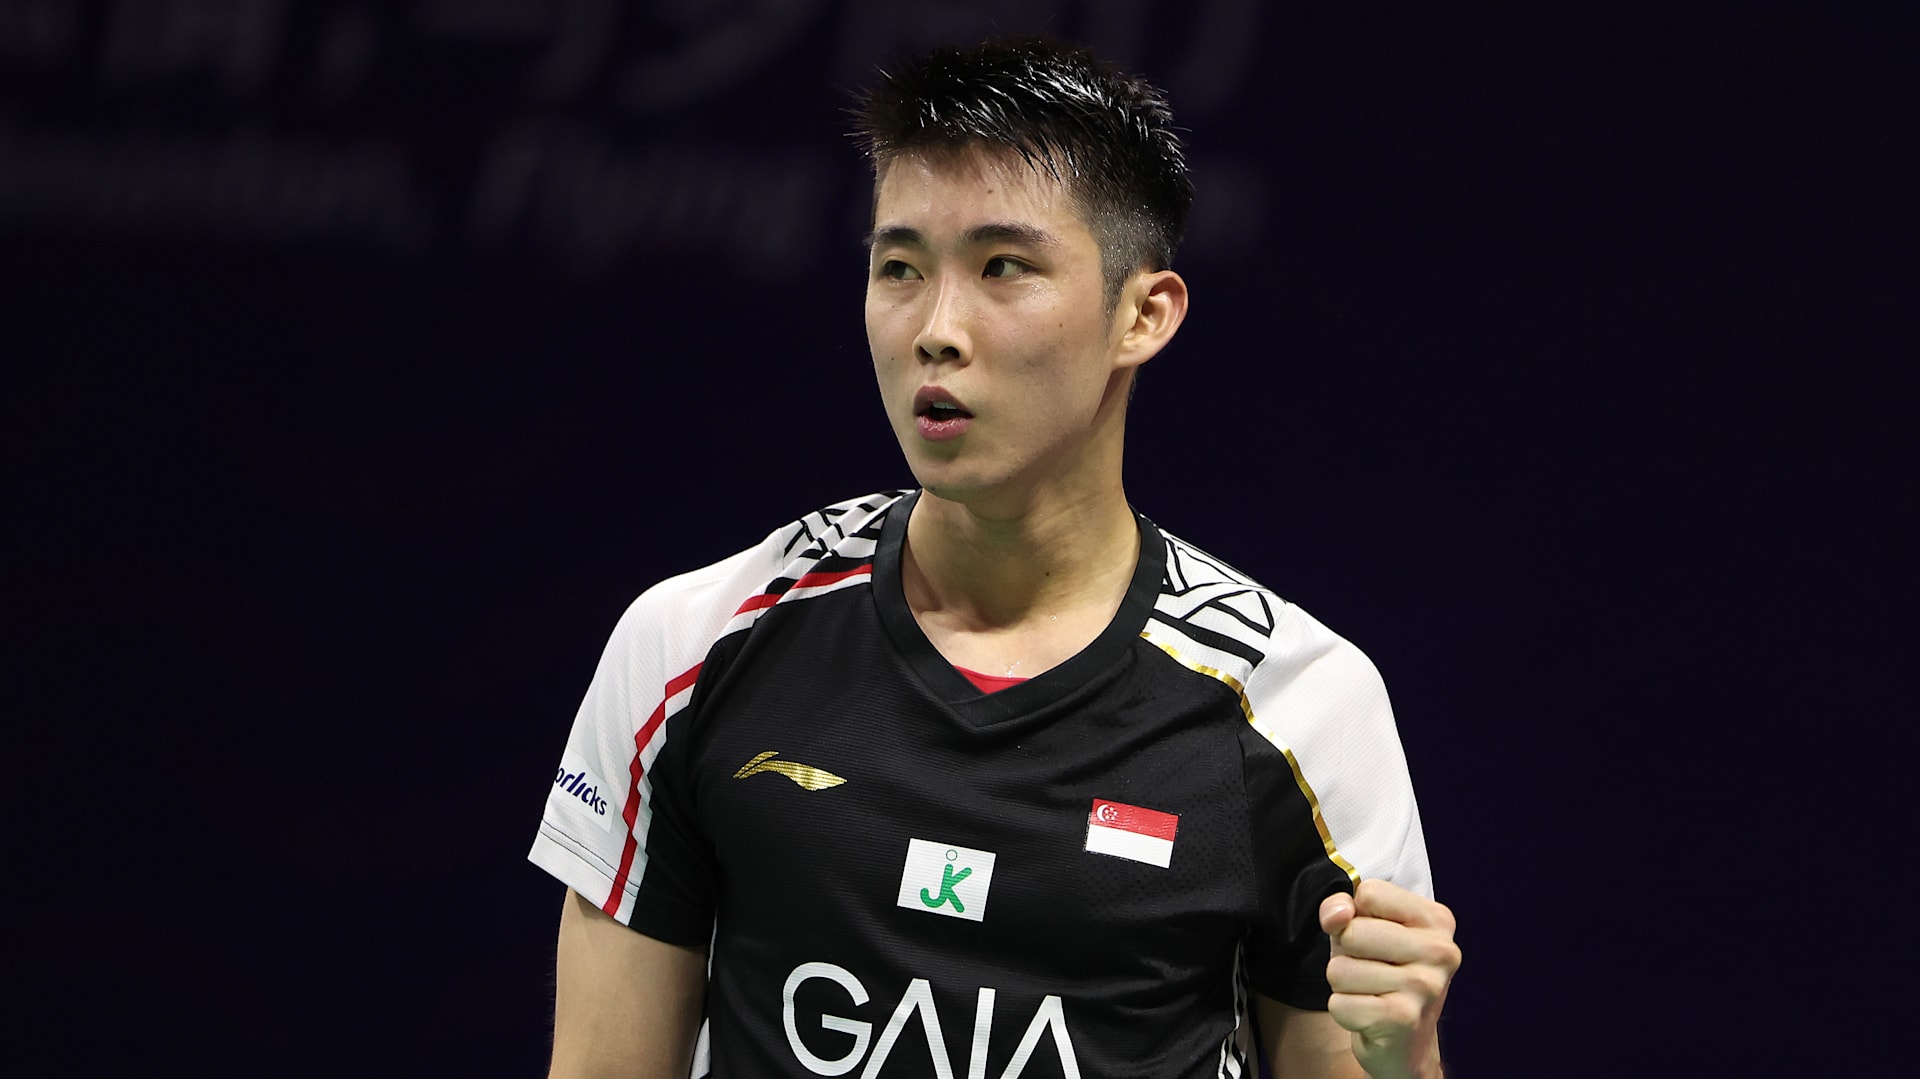 A busy day at the China Open badminton saw a comfortable win for Loh Kean Yew, while India stars Lakshya Sen and HS Prannoy crashed out